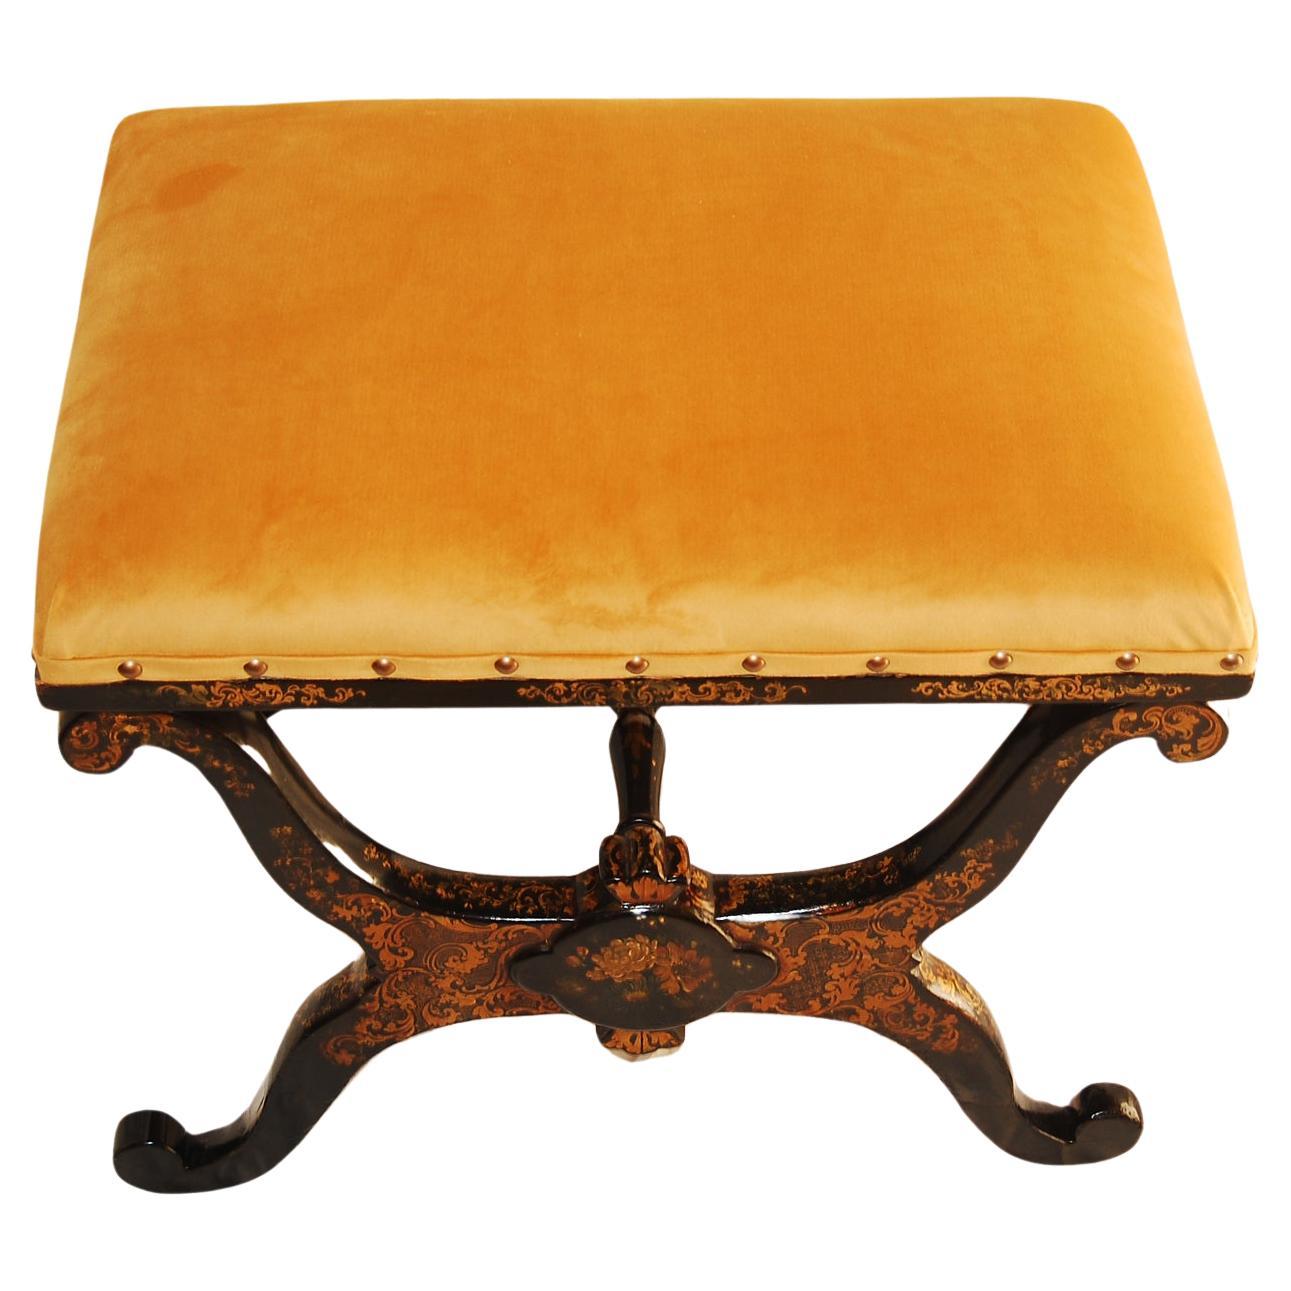 English William IV Black Lacquered X Frame Stool with Original Gold Decoration For Sale